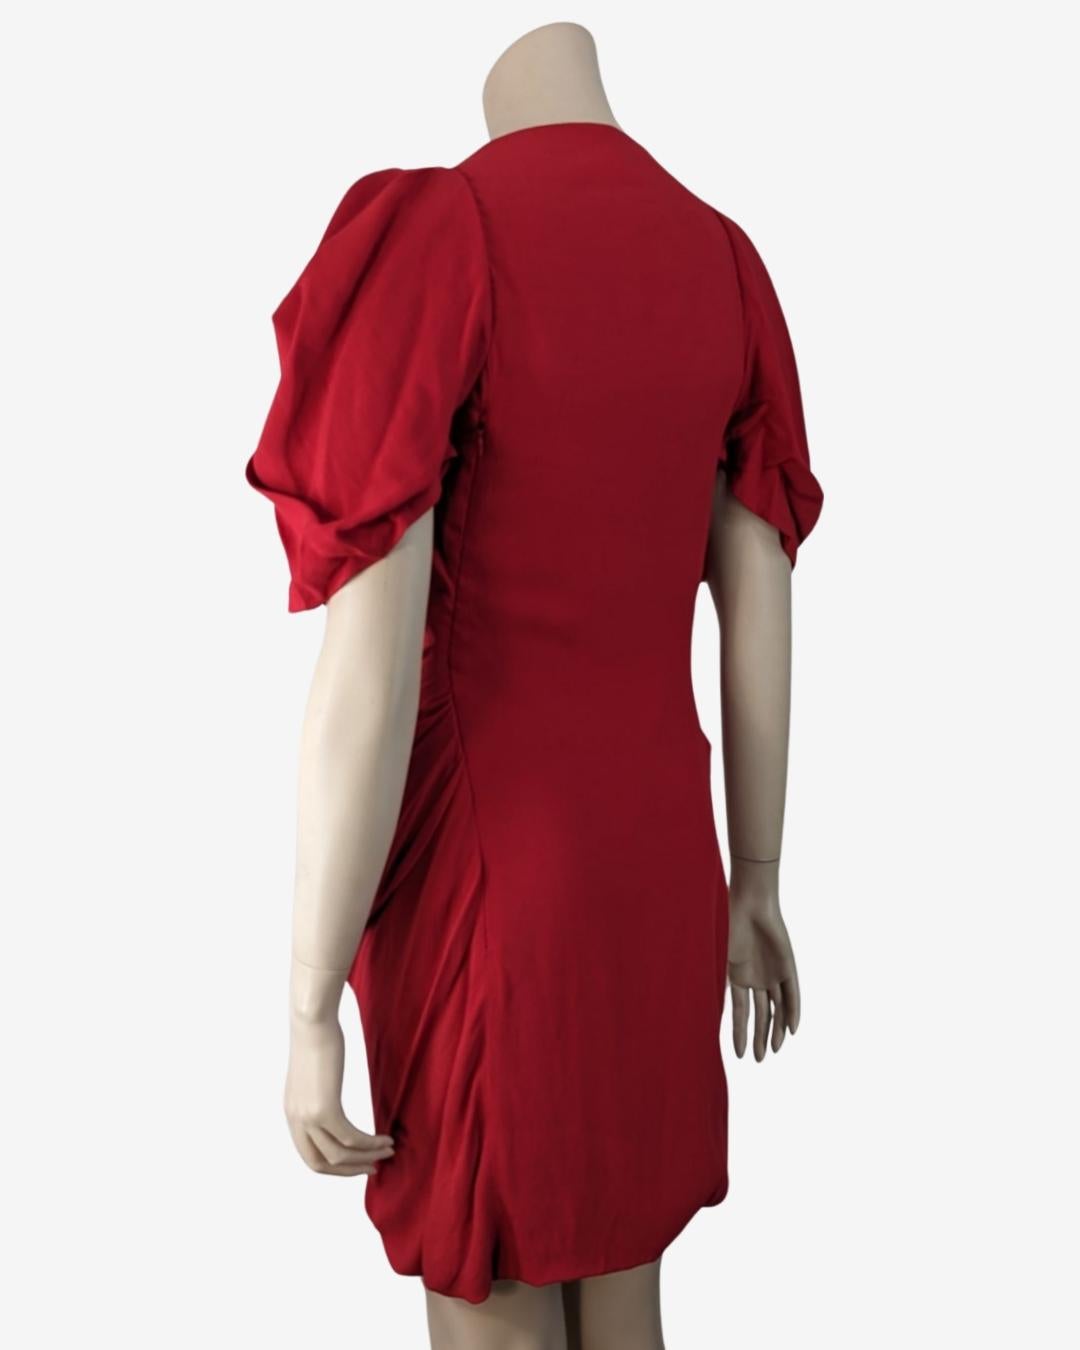 Vivienne Westwood Opened Sleeves Cherry Red Mini dress For Sale 1